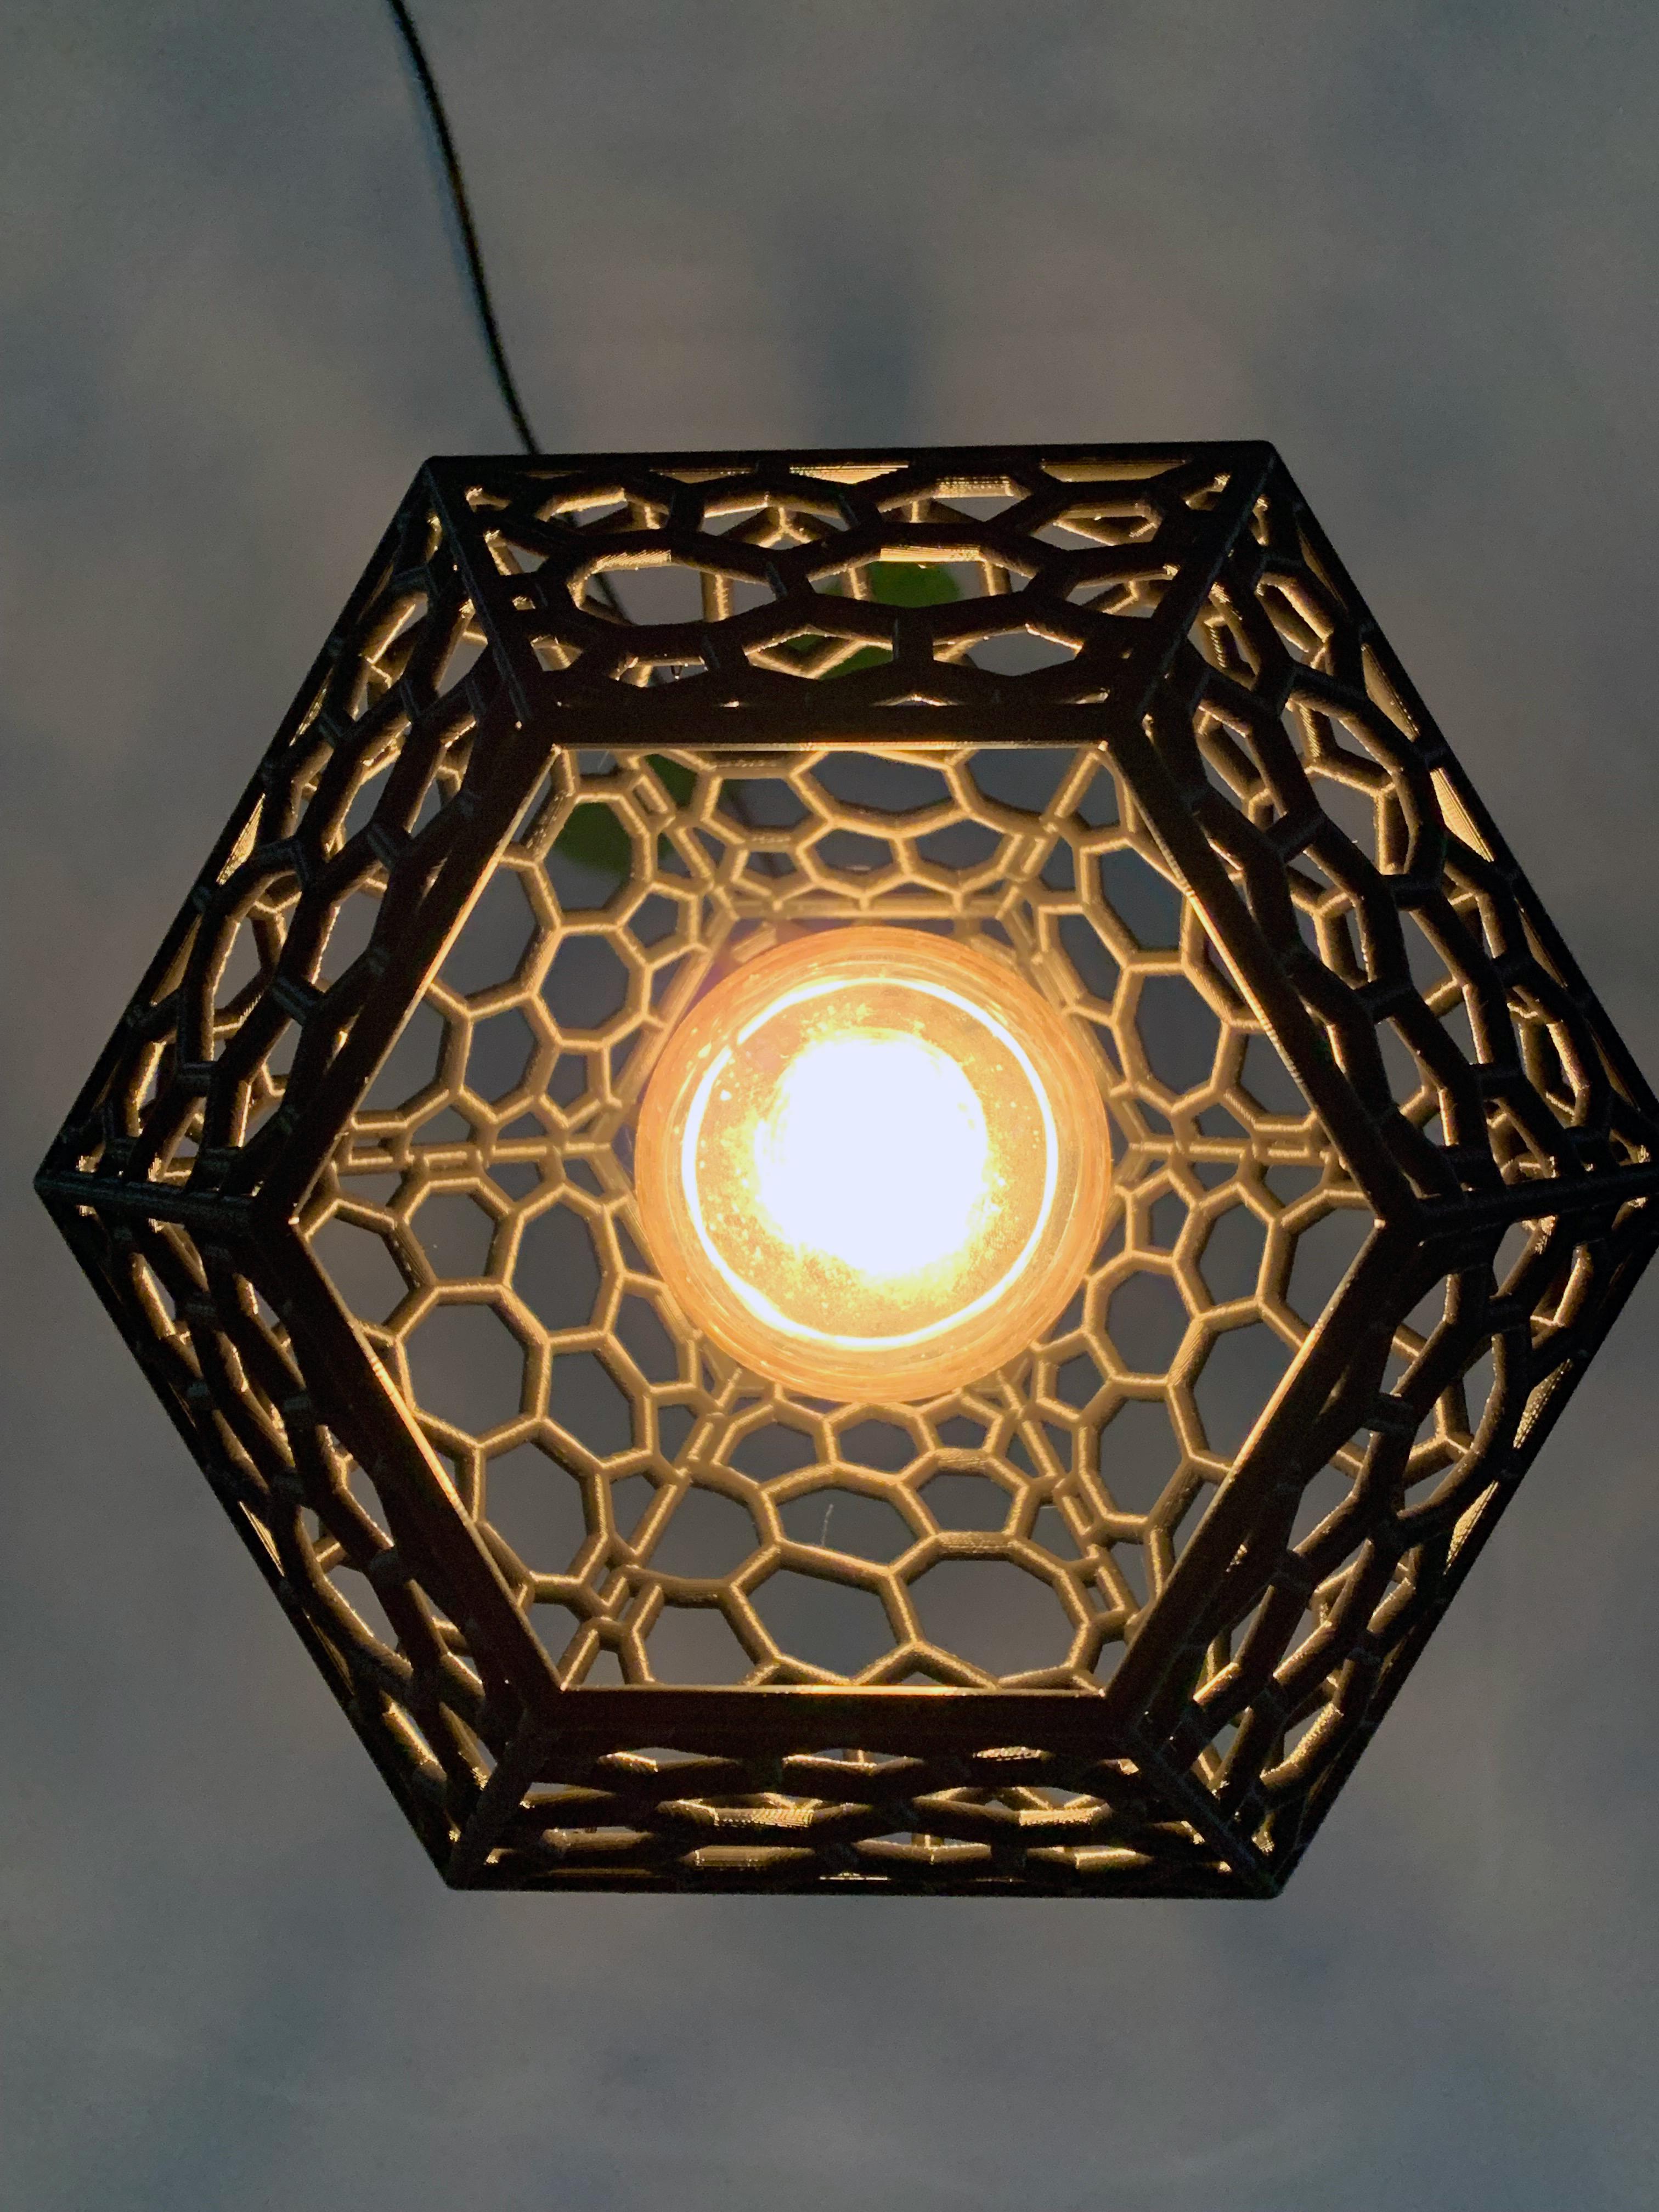 Lamp Shade with Hexagon Lattice - View from beneath hexagon lattice lamp shade  - 3d model